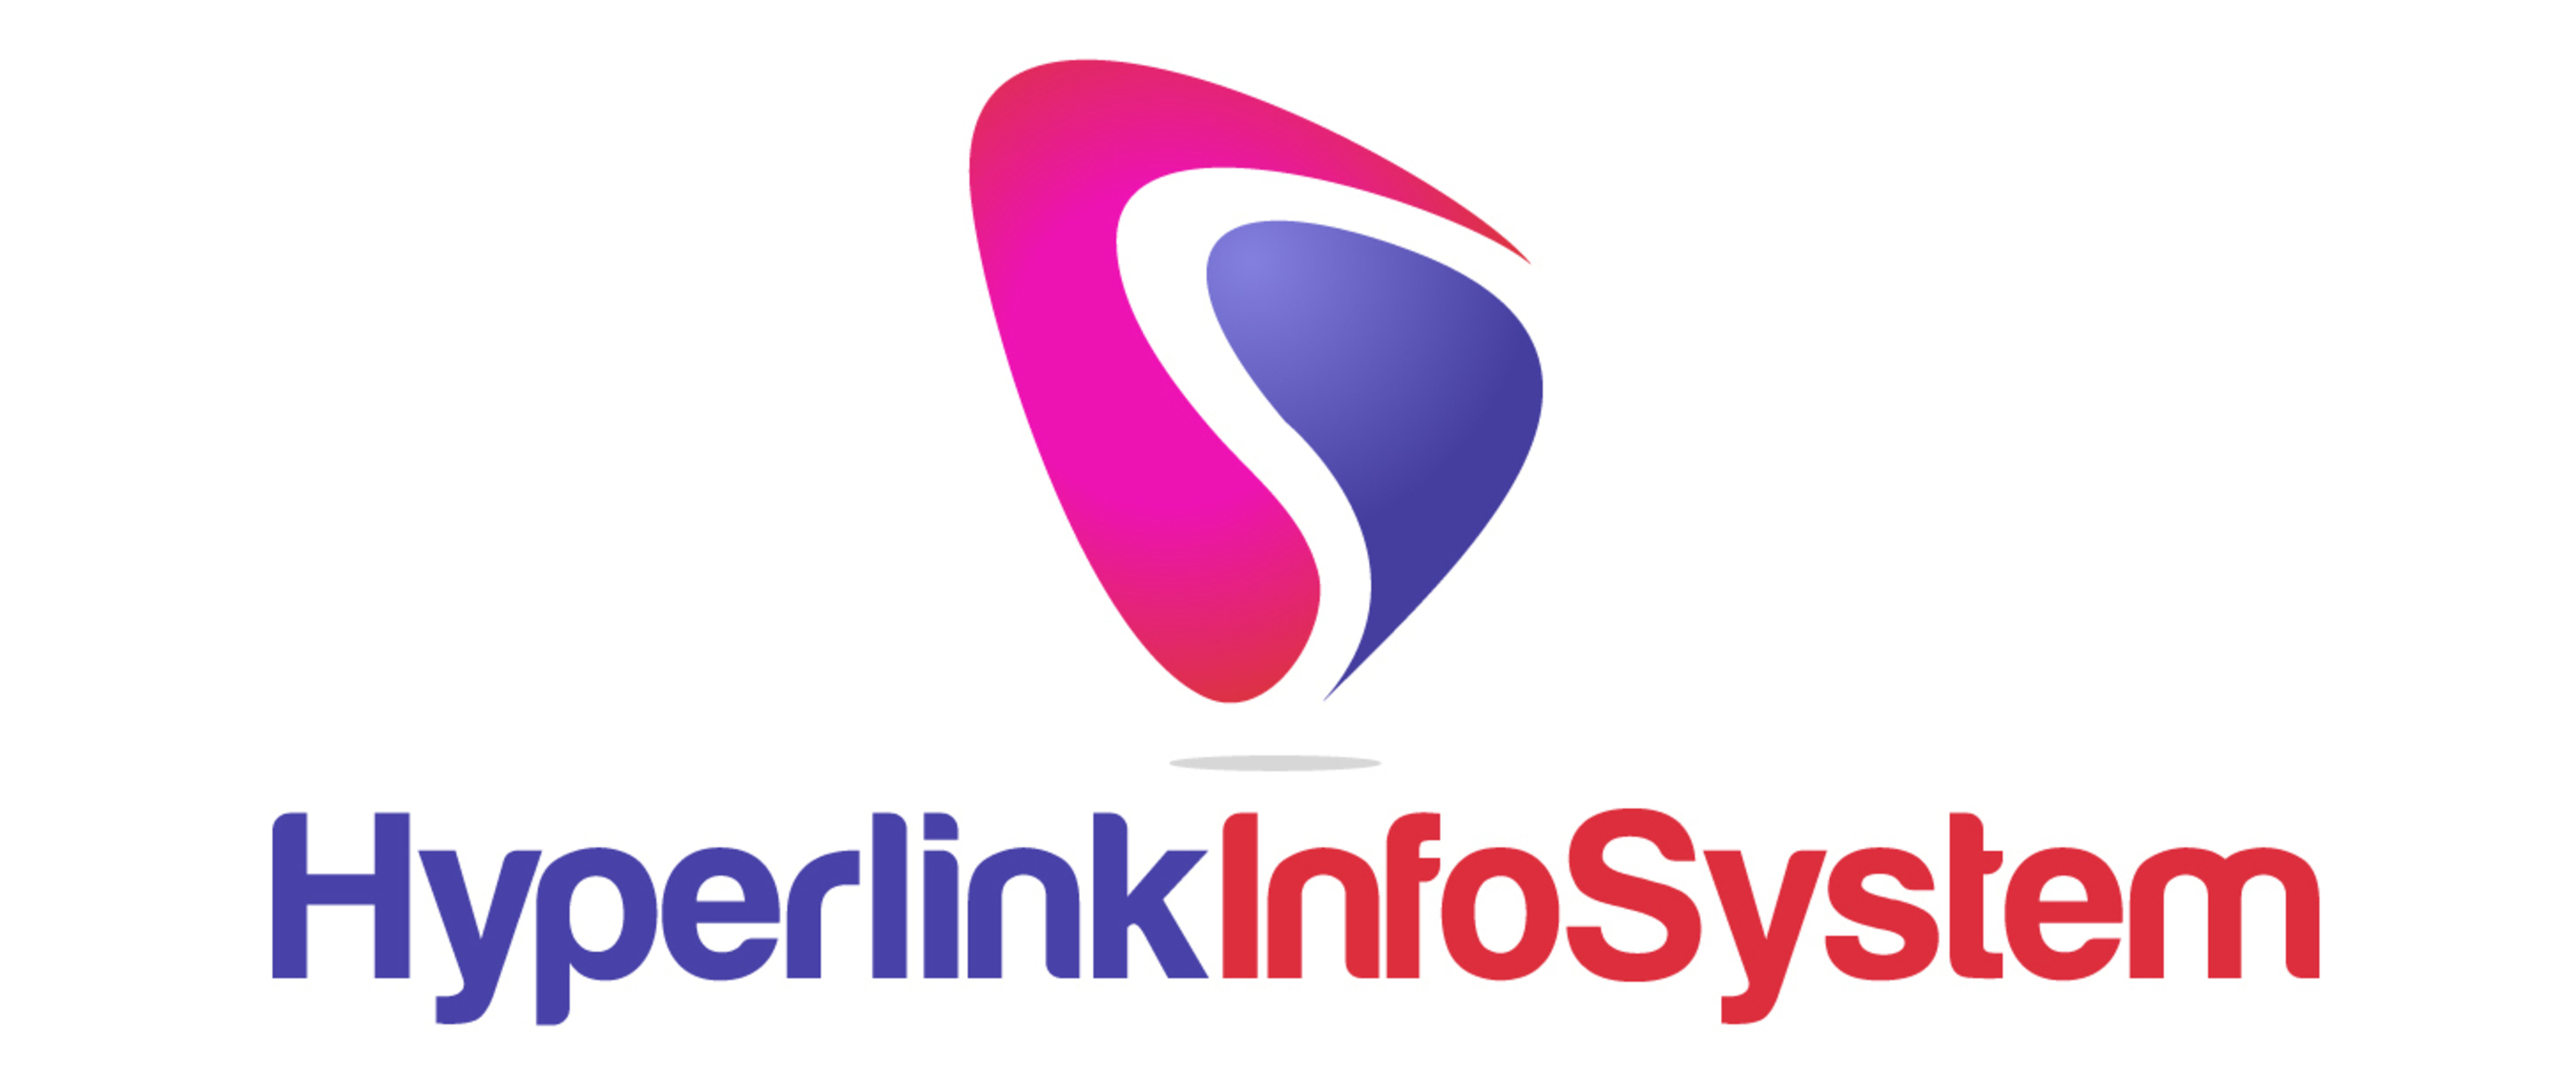 Mobile application development company's hyperlink information system reveals the cost and time to create an application in 2018